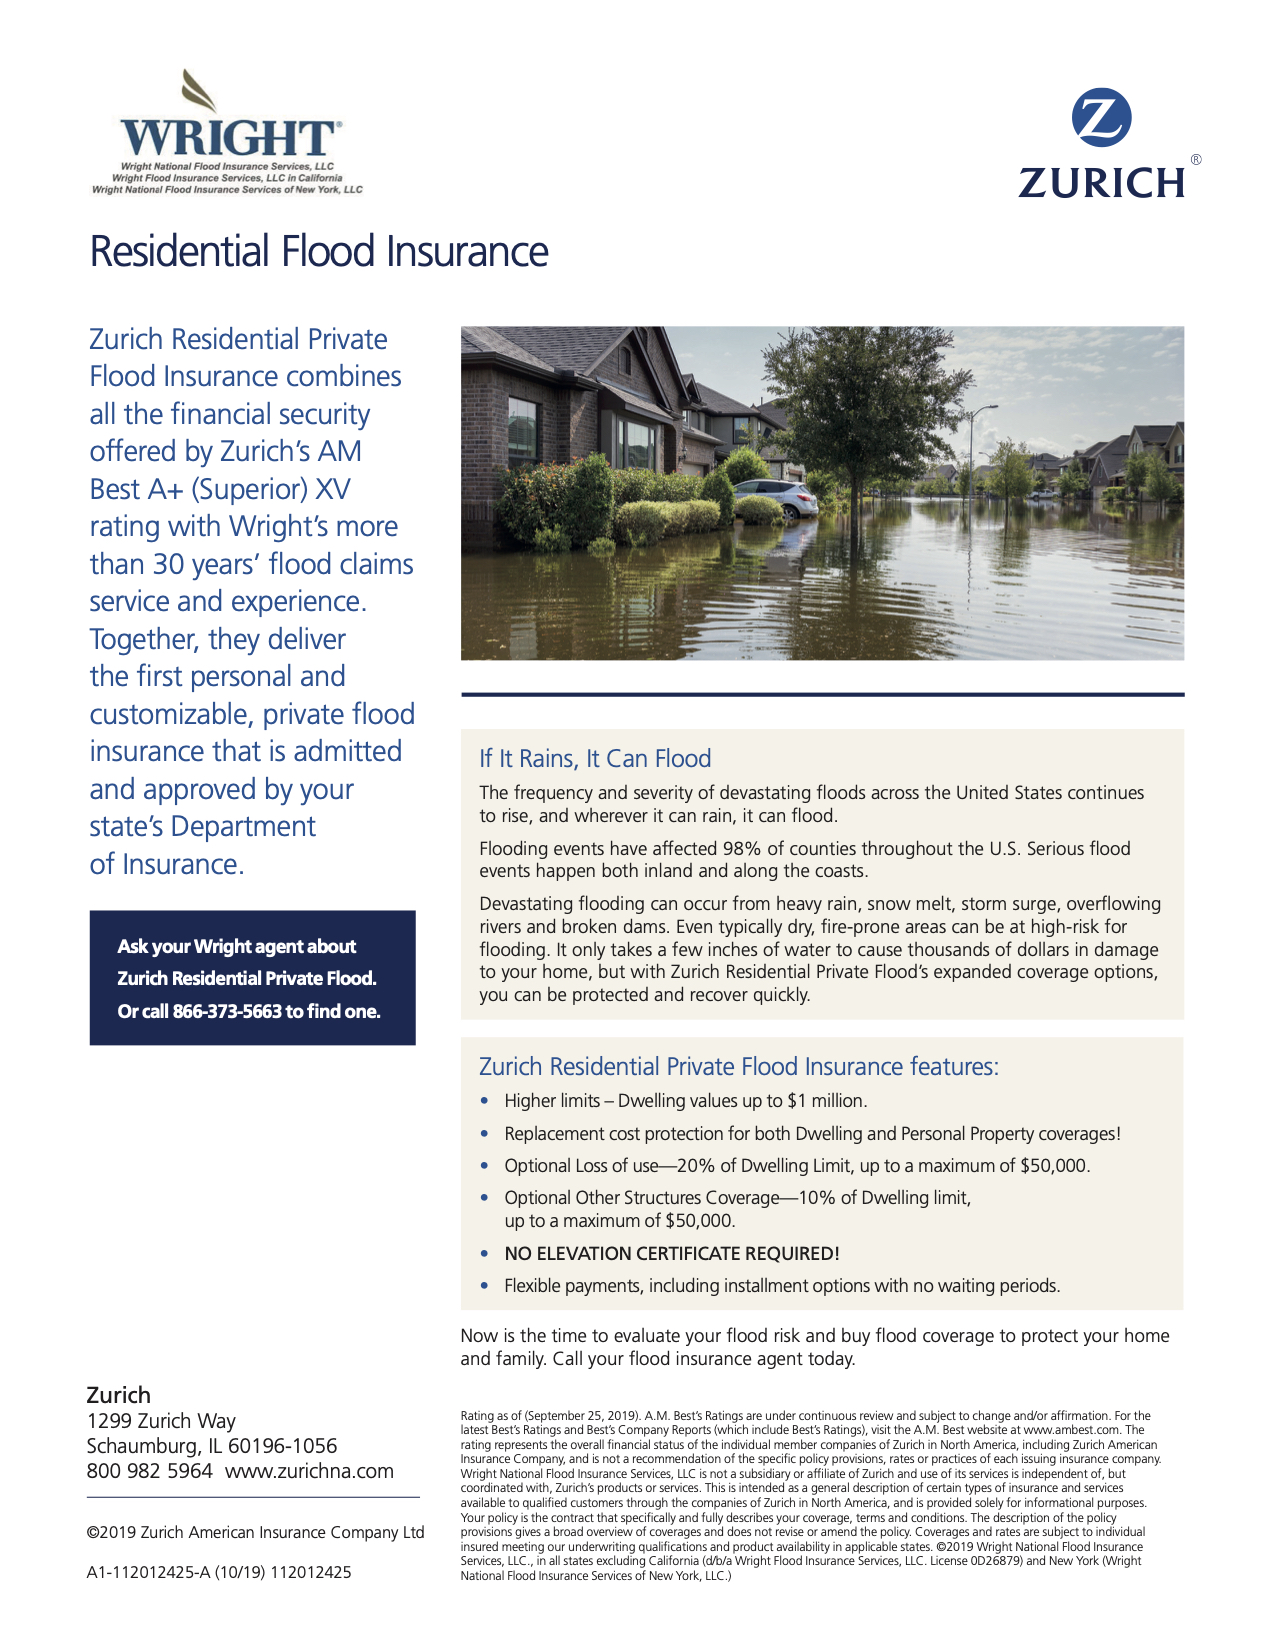 MyFloodInsurance.com Offers New Platform to Compare, Quote and Purchase Flood  Insurance Policies